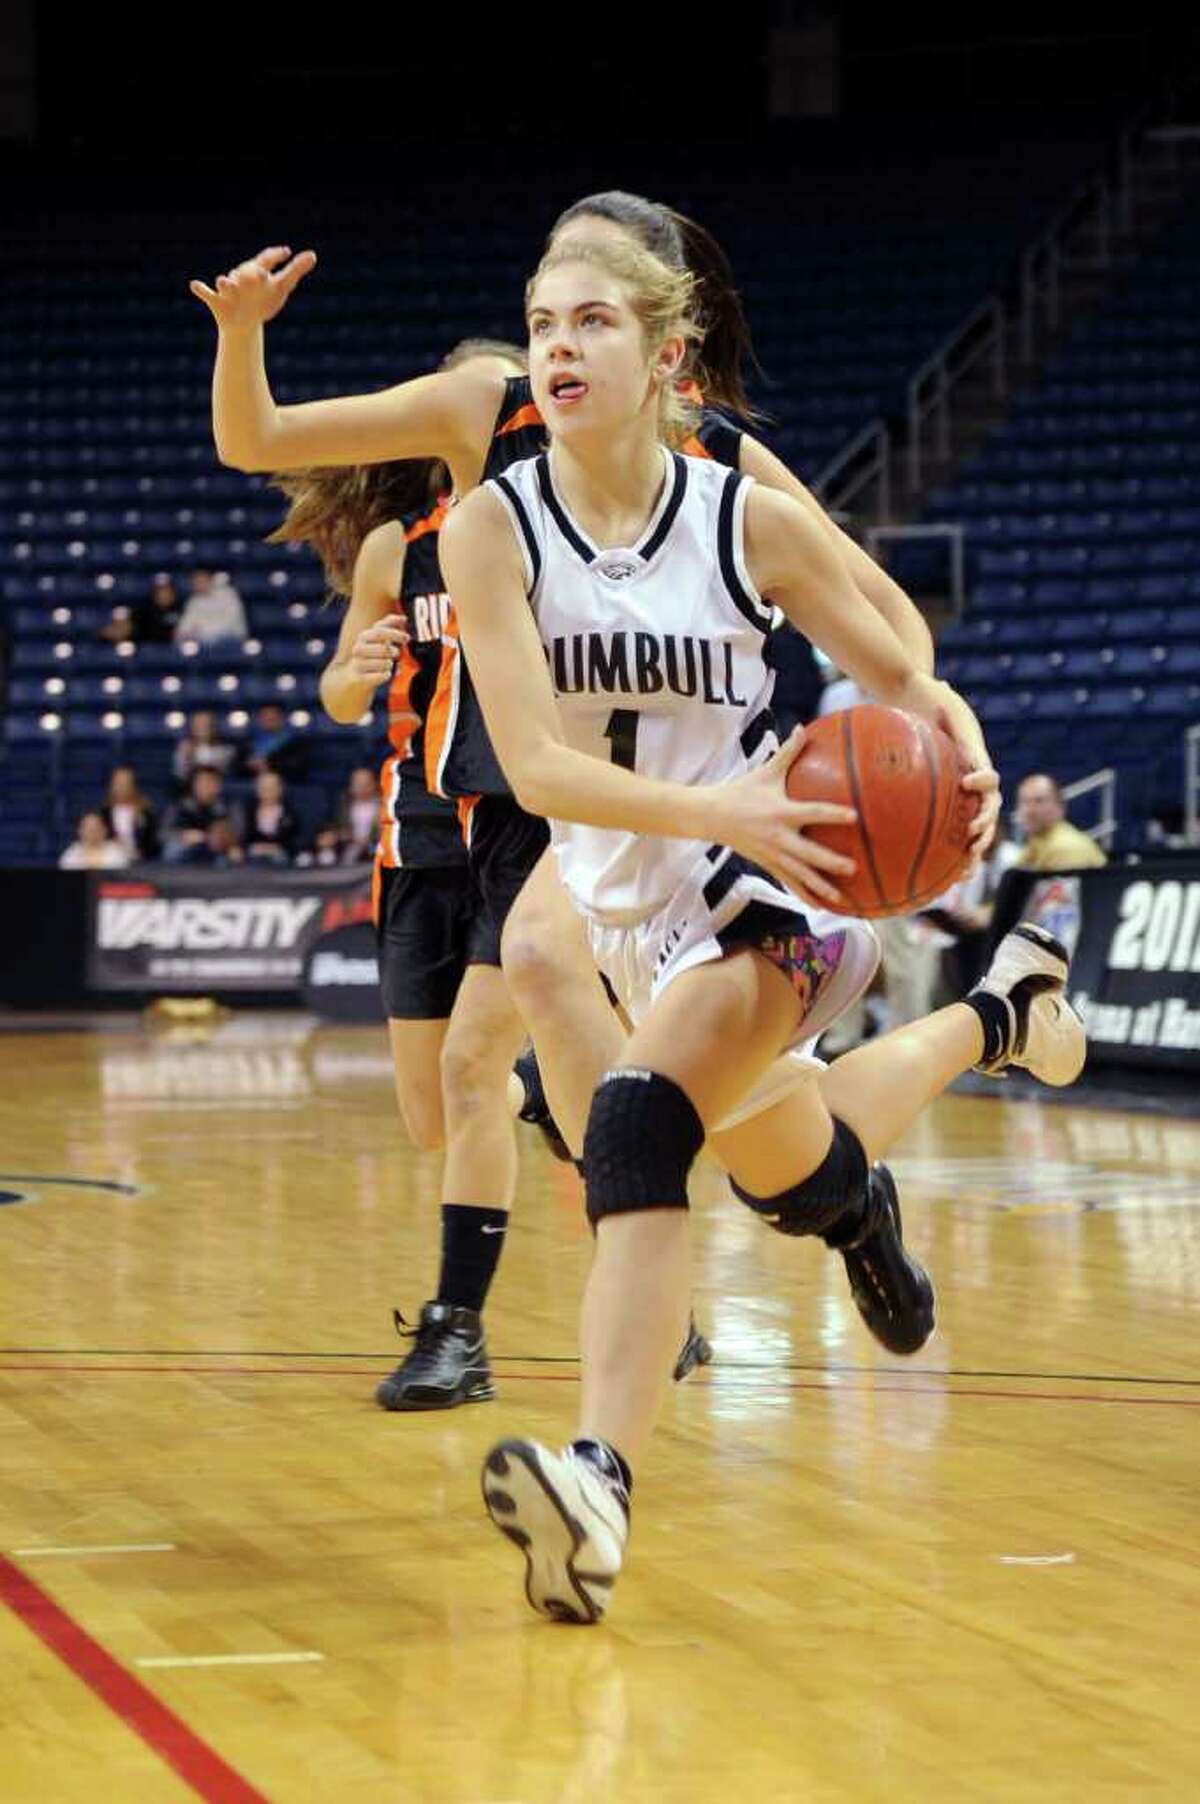 Trumbull's Alexa Pfohl dribbles the ball during Thursday's FCIAC girls basketball championship game at Webster Bank Arena at Harbor Yard on February 24, 2011. Pfohl was named Most Valuable Player after the game.